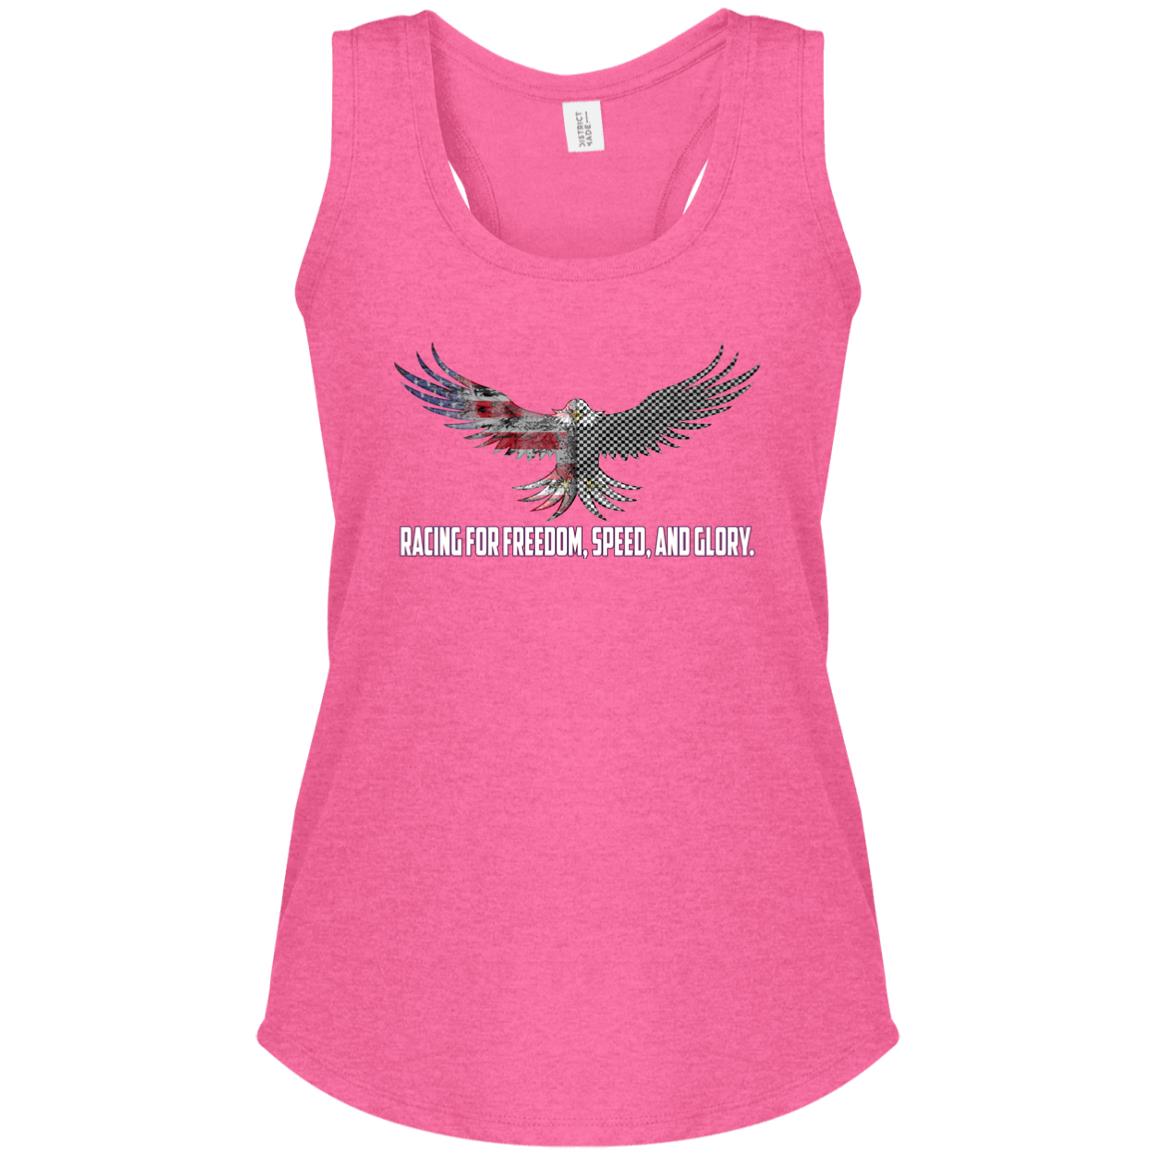 Racing For Freedom, Speed, And Glory Women's Perfect Tri Racerback Tank